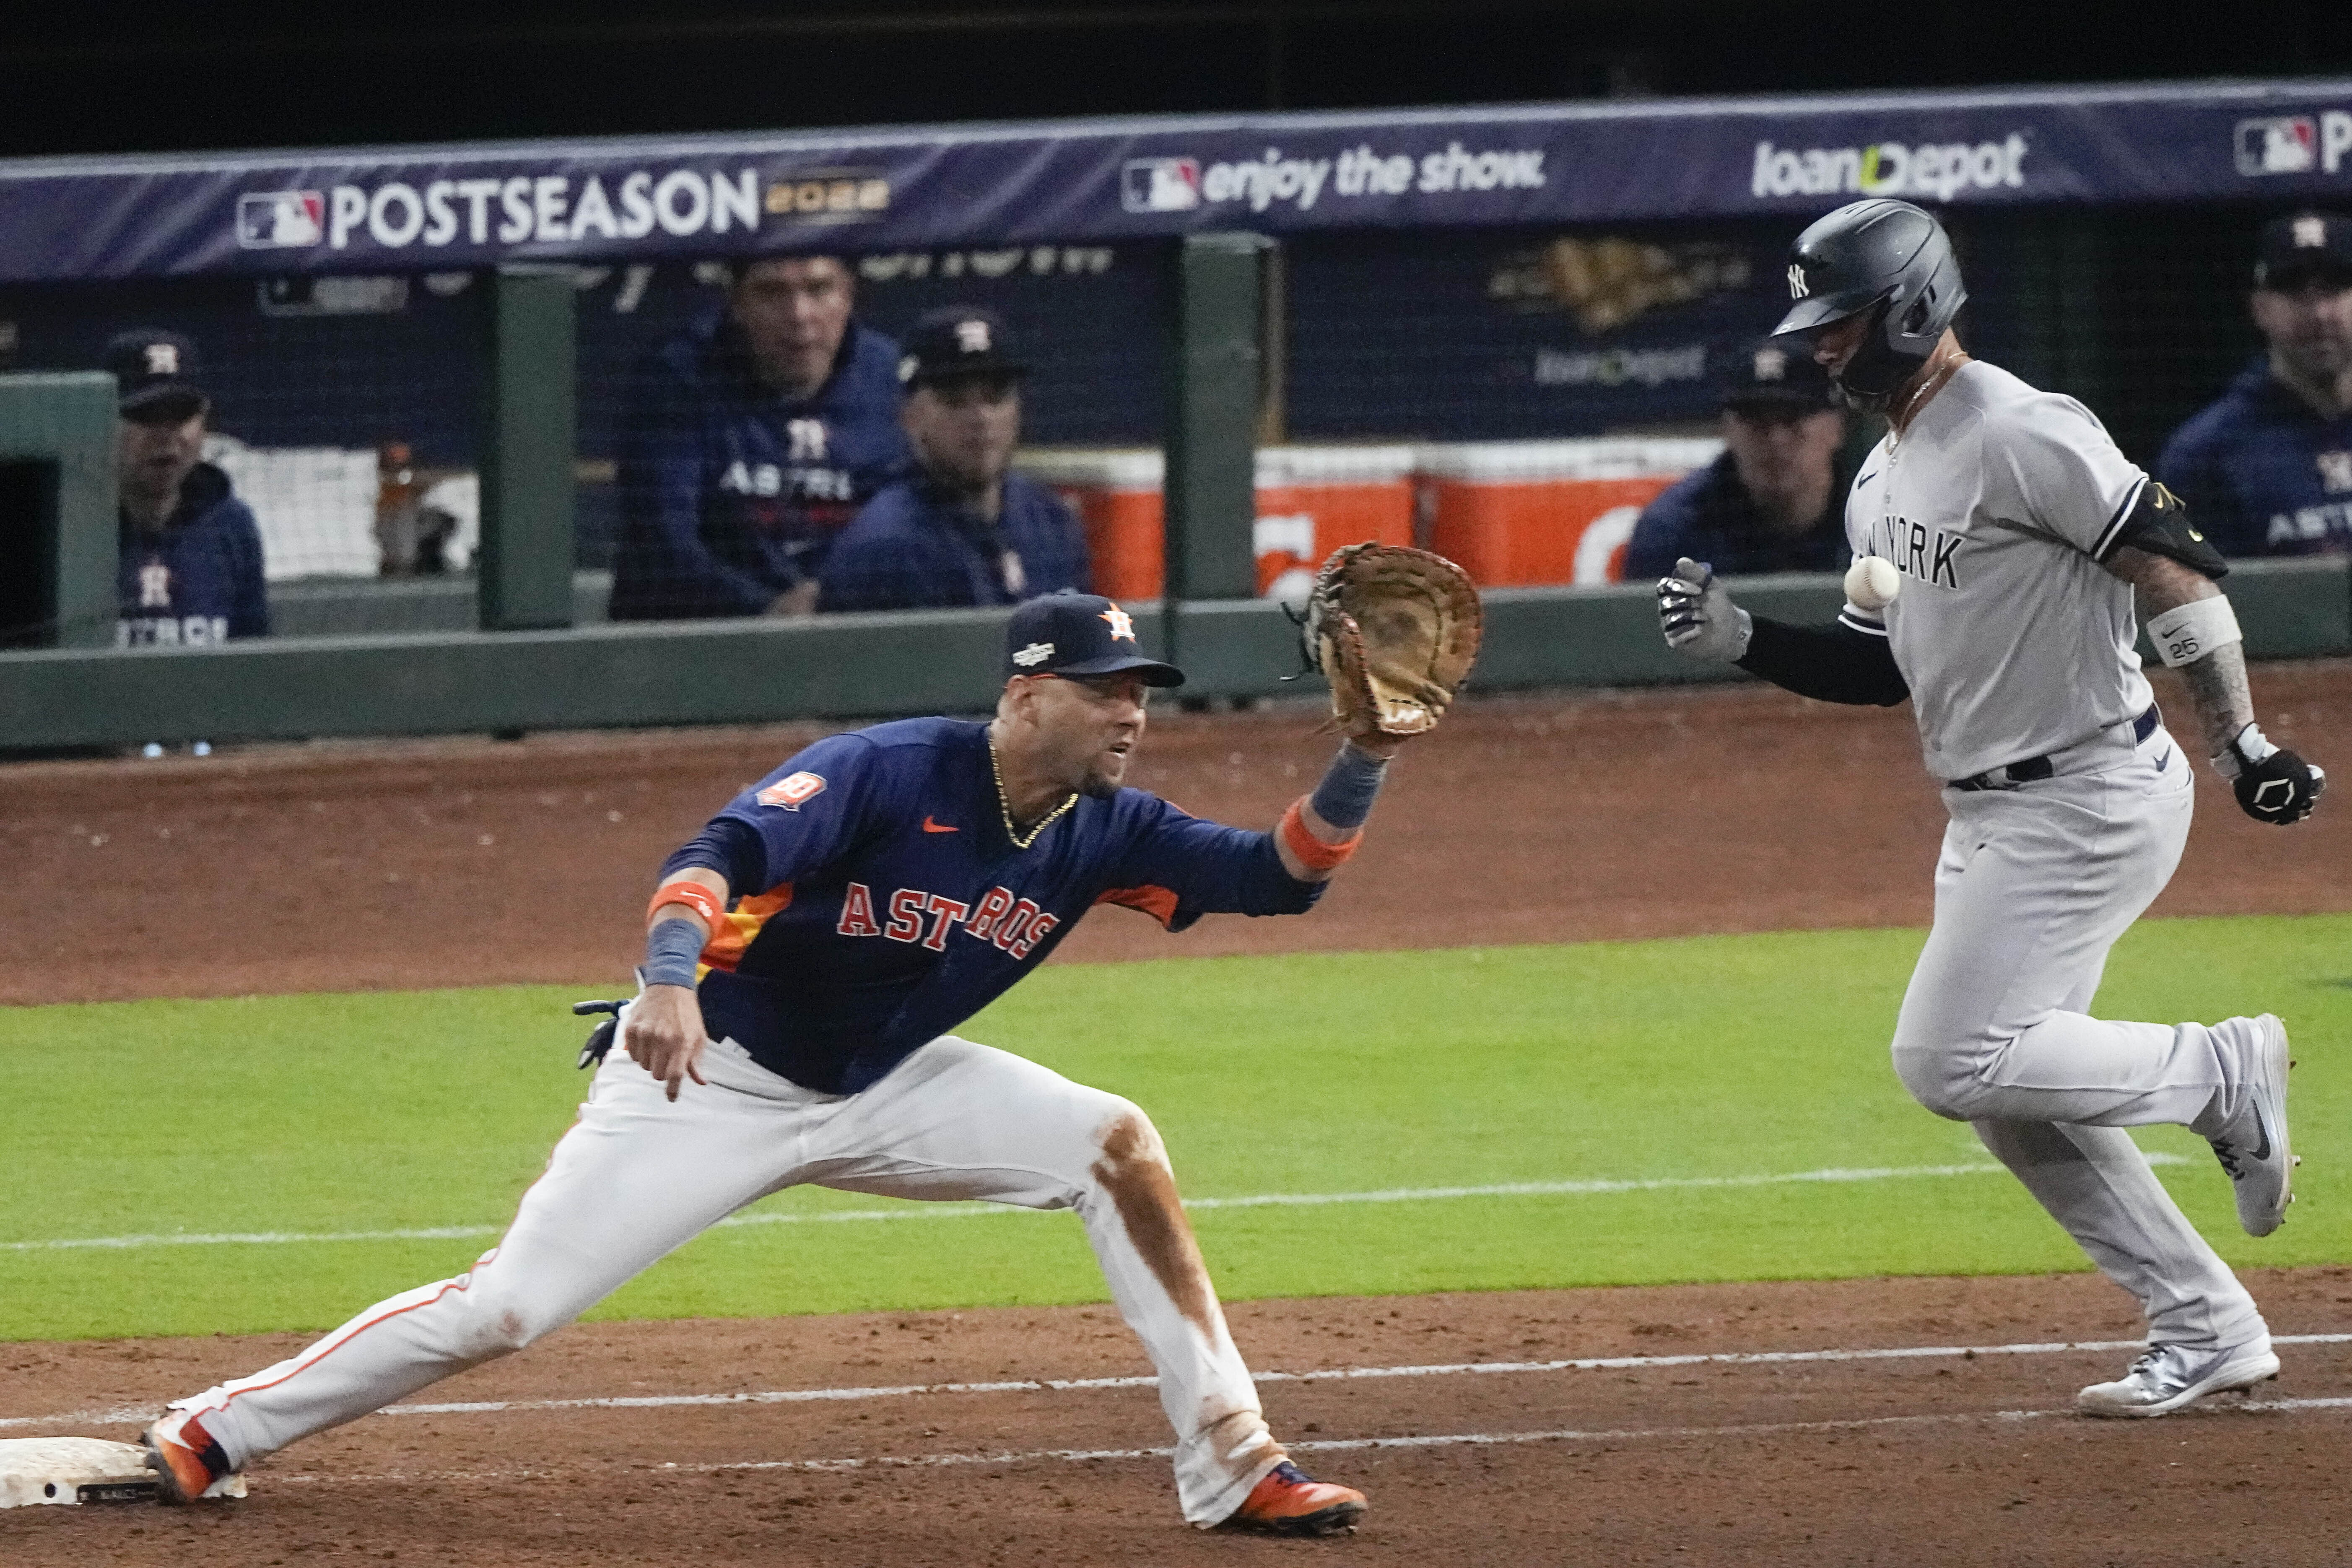 Yankees vs Astros Prediction, Expert Picks for ALCS Game 1 MLB Playoffs